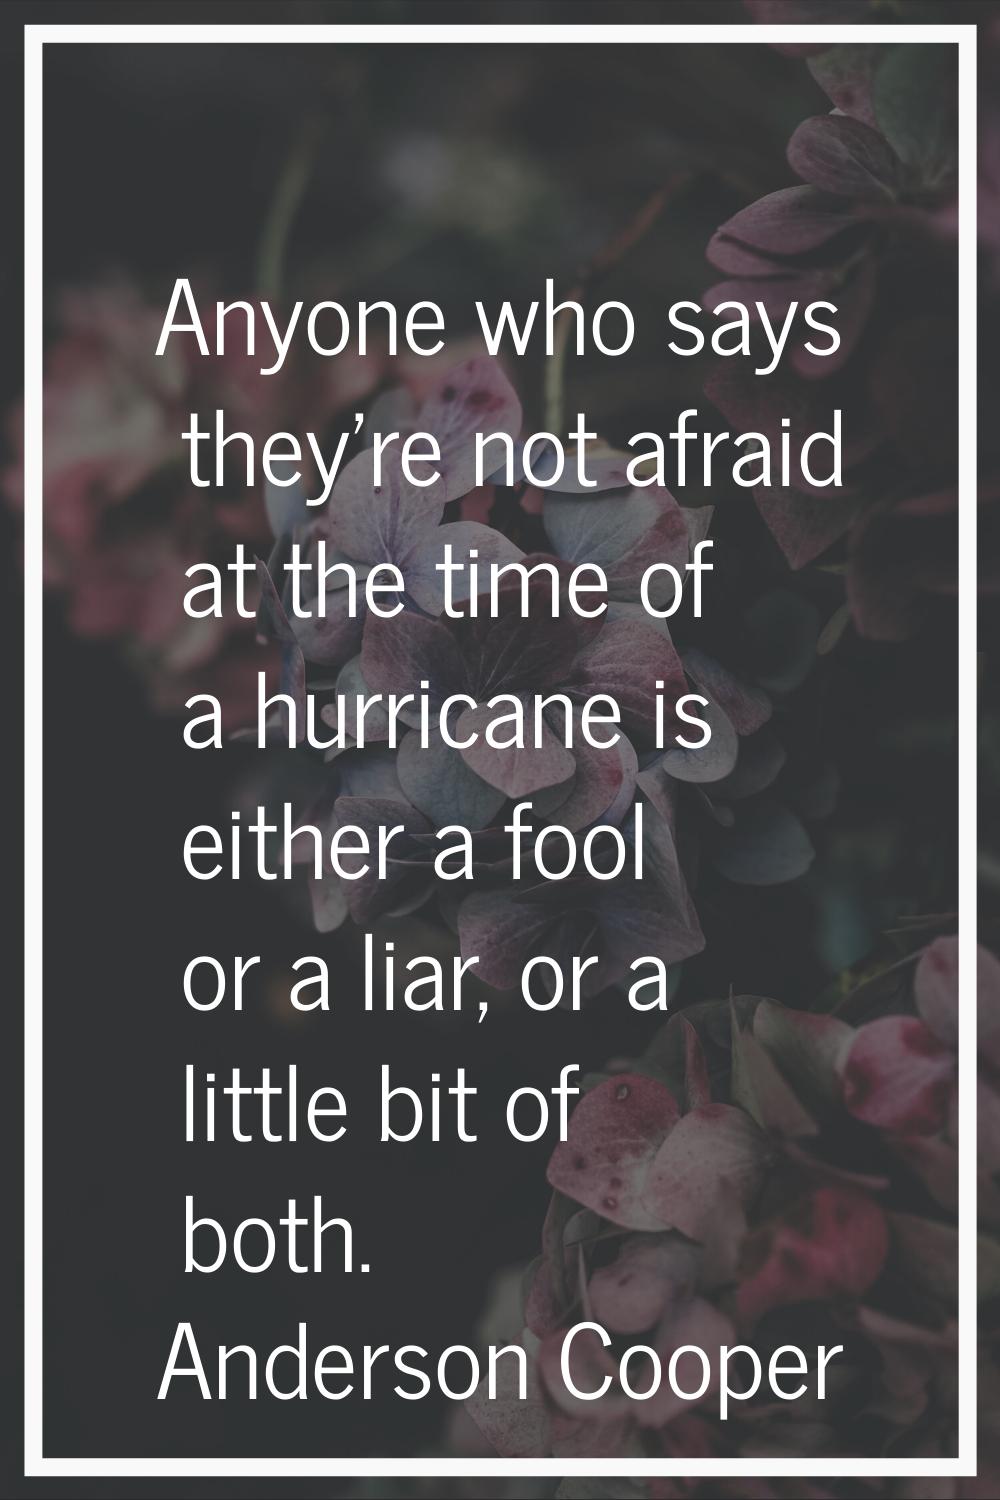 Anyone who says they're not afraid at the time of a hurricane is either a fool or a liar, or a litt